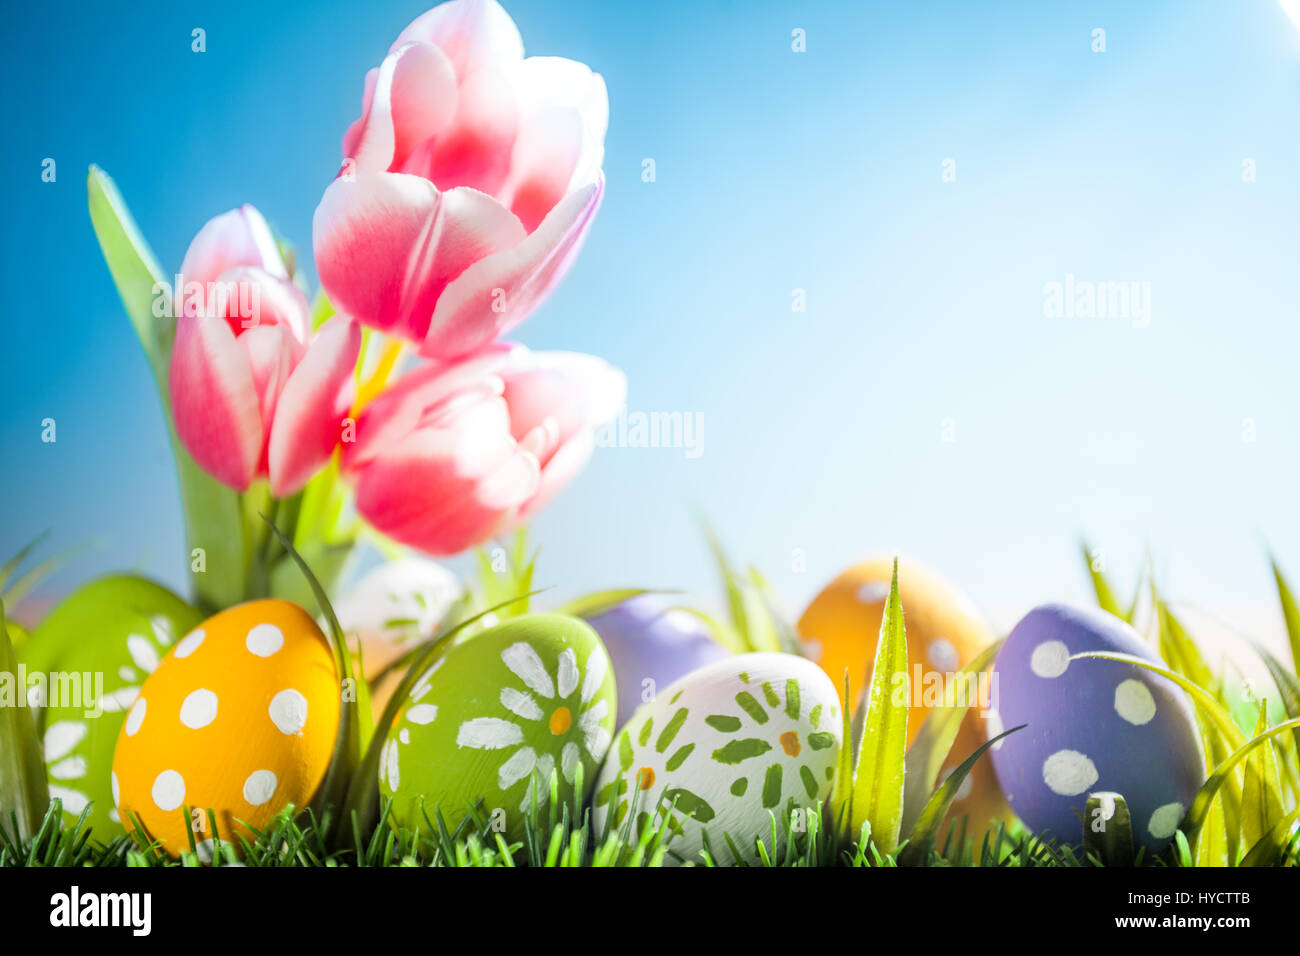 Easter eggs hiding in the grass with tulips Stock Photo